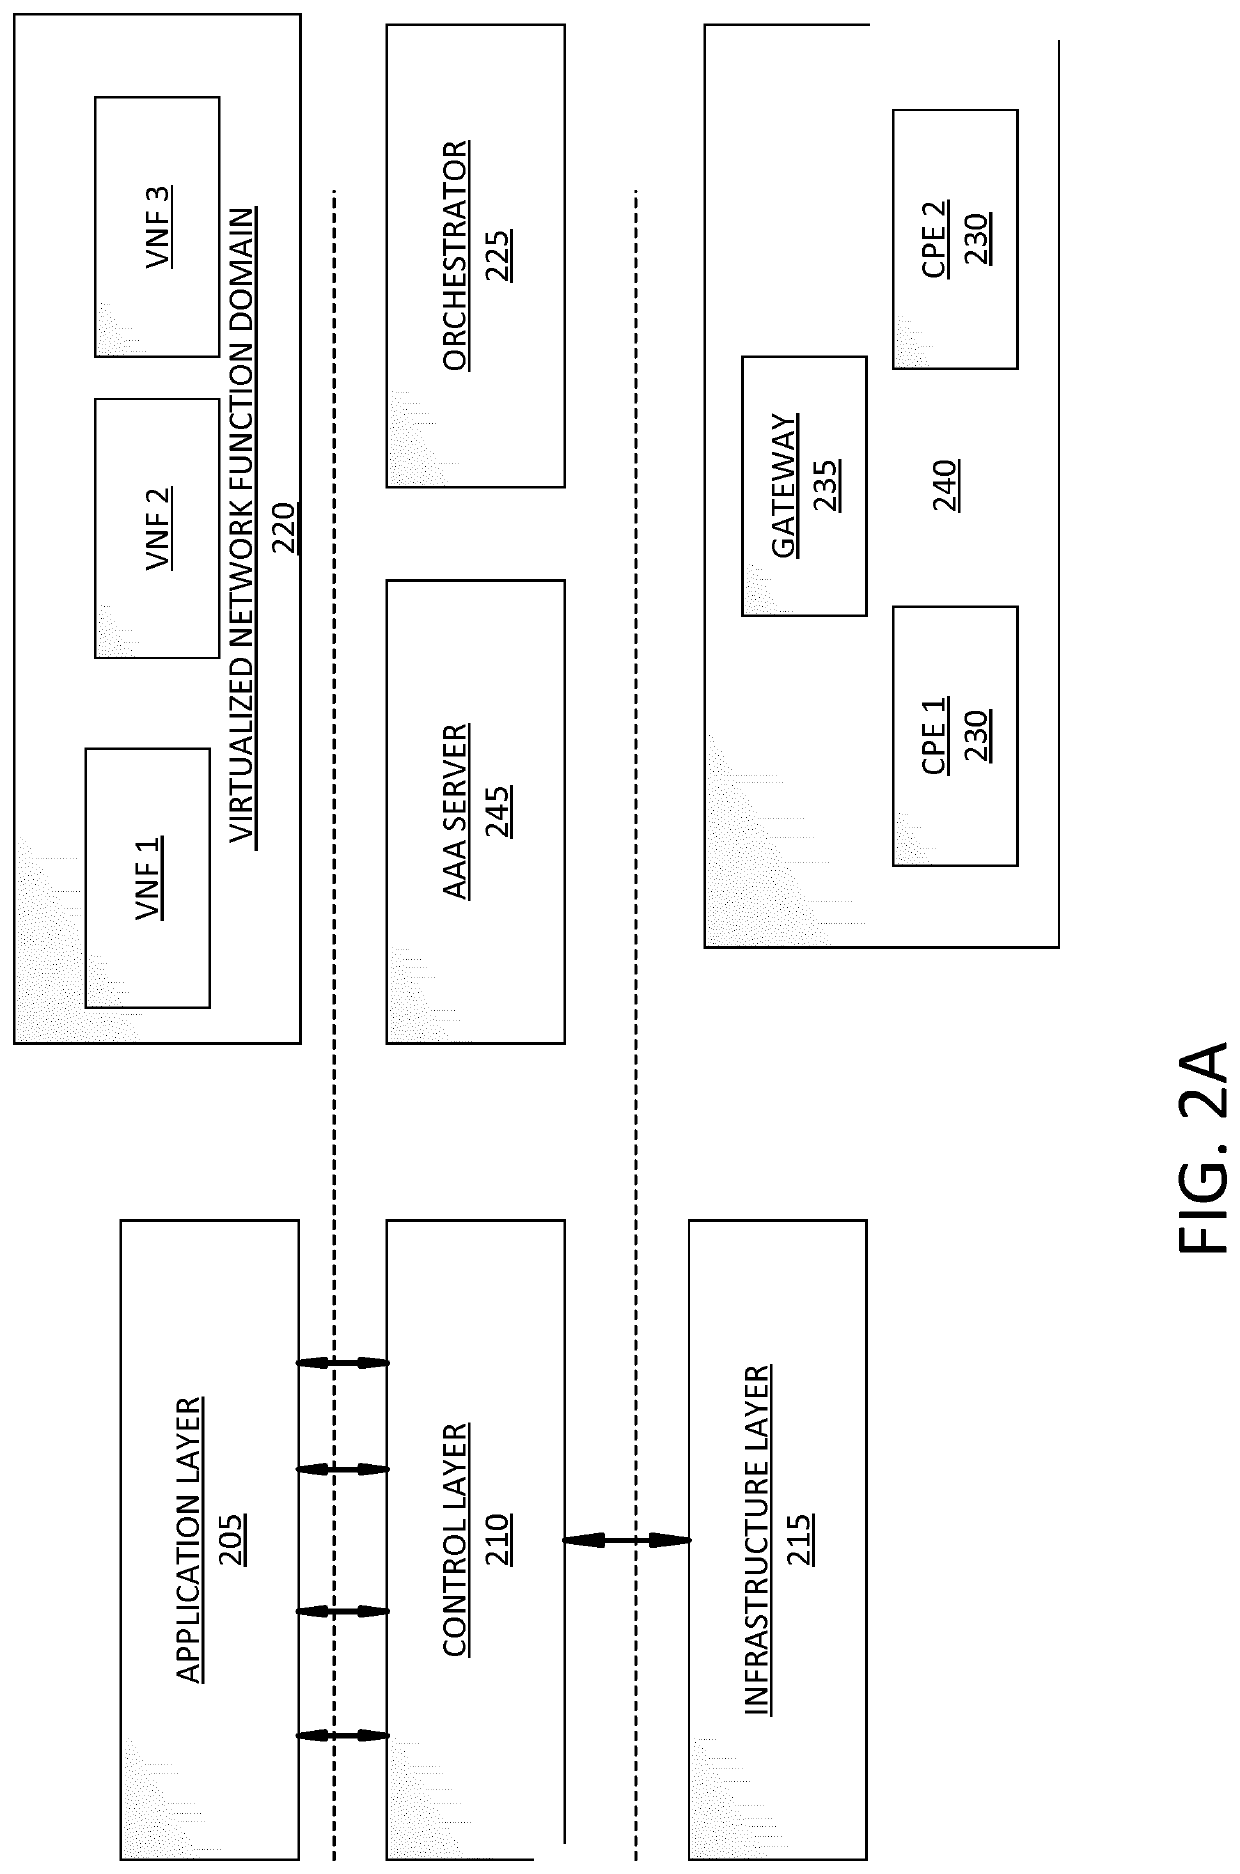 System and method for dynamic network function virtualization processing